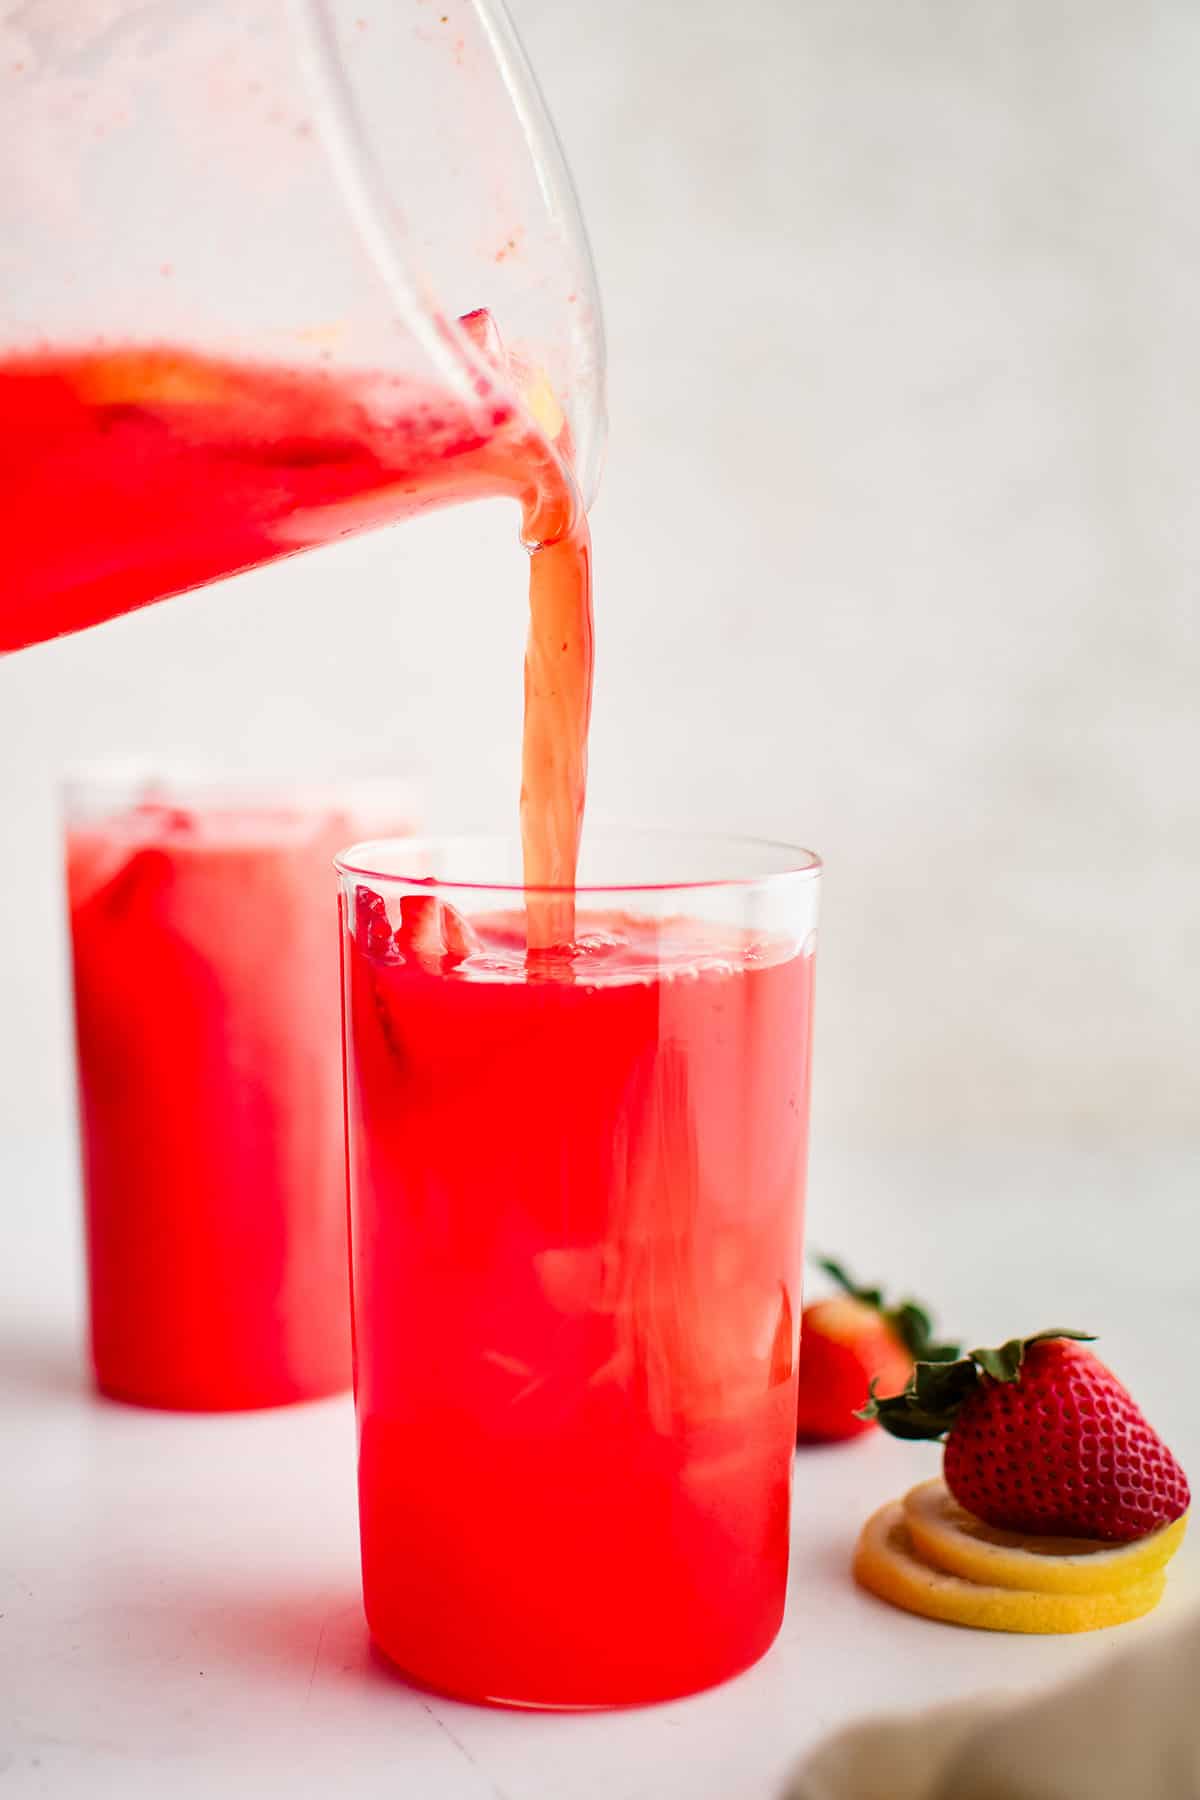 strawberry lemonade being poured from a pitcher into a glass